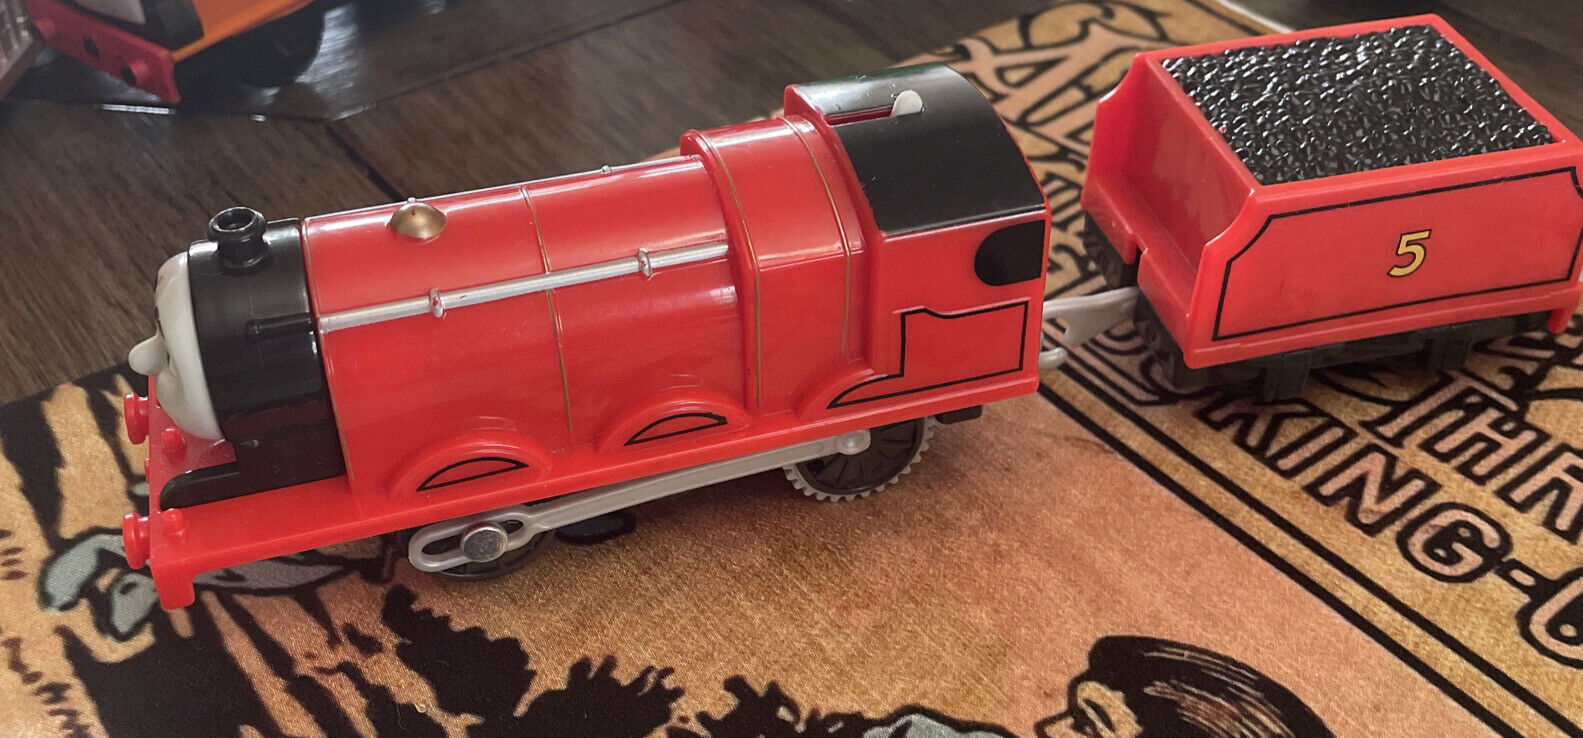 Primary image for Thomas & Friends Trackmaster James Motorized Train Engine and Tender Mattel 2013